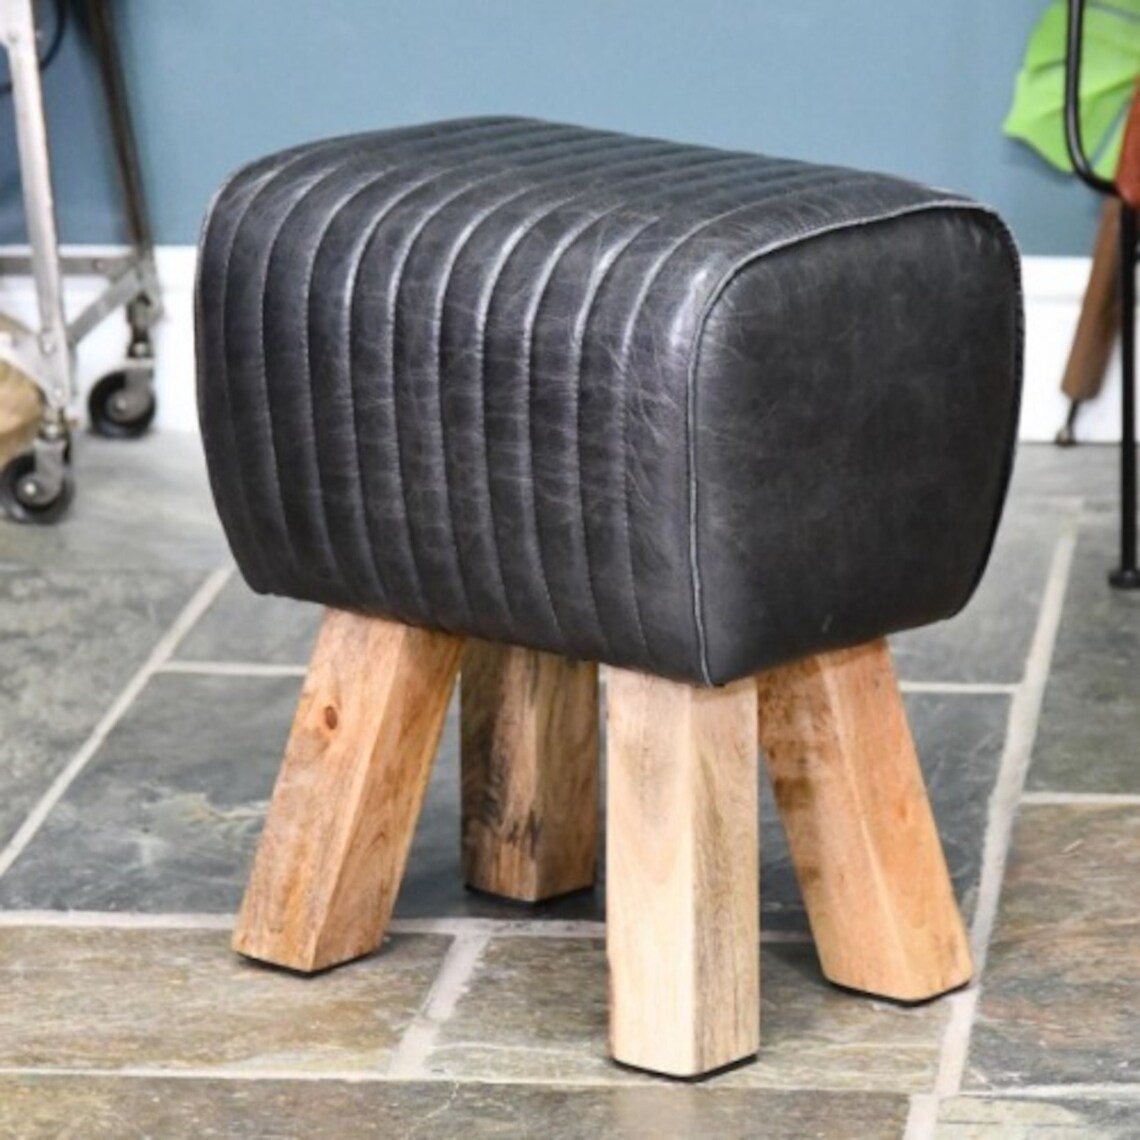 Black Industrial Style Stool Mango Wood & Black Leather Stool - Black Country Foundry